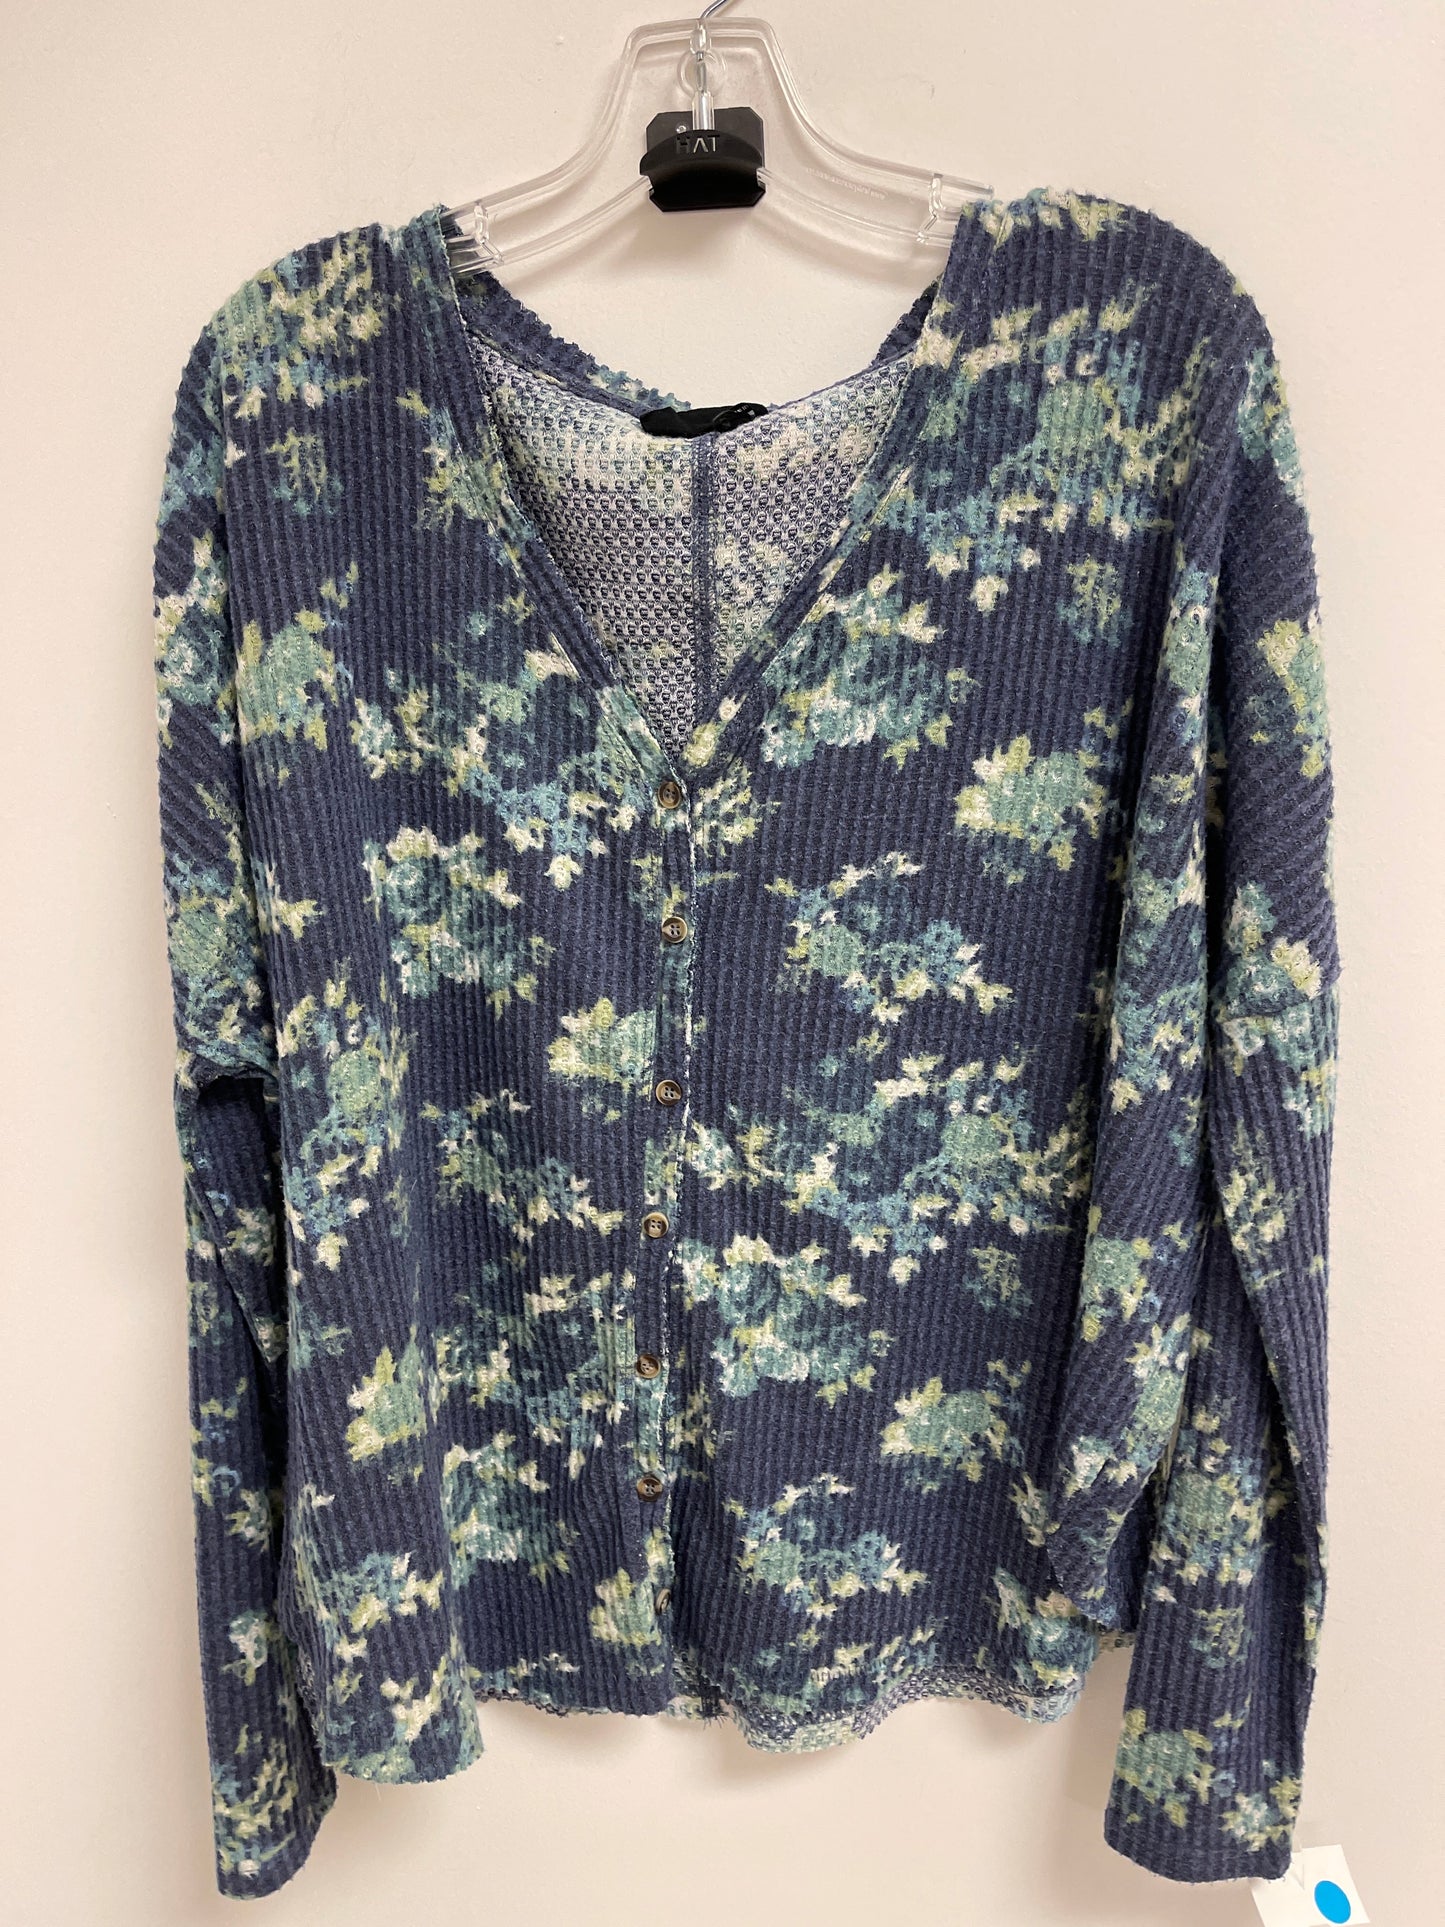 Navy Top Long Sleeve Urban Outfitters, Size M